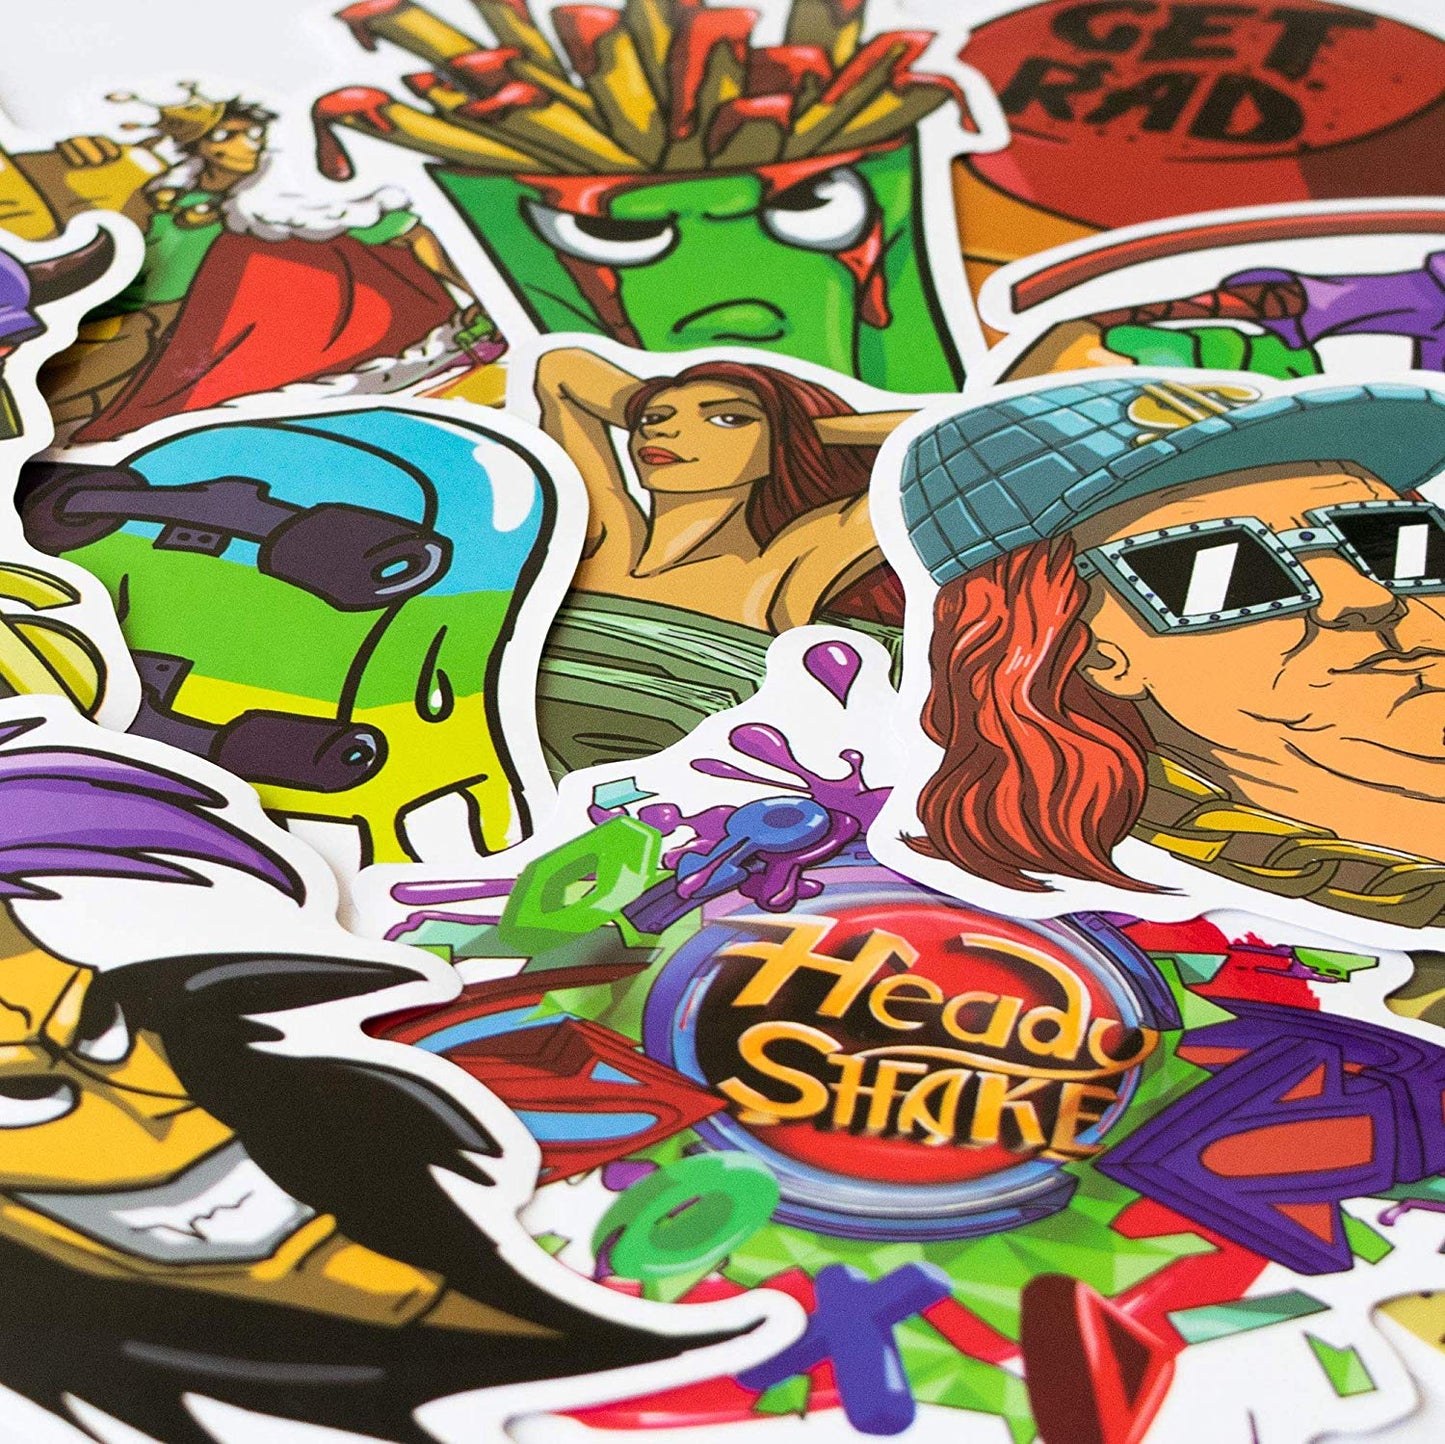 Stickers Pack